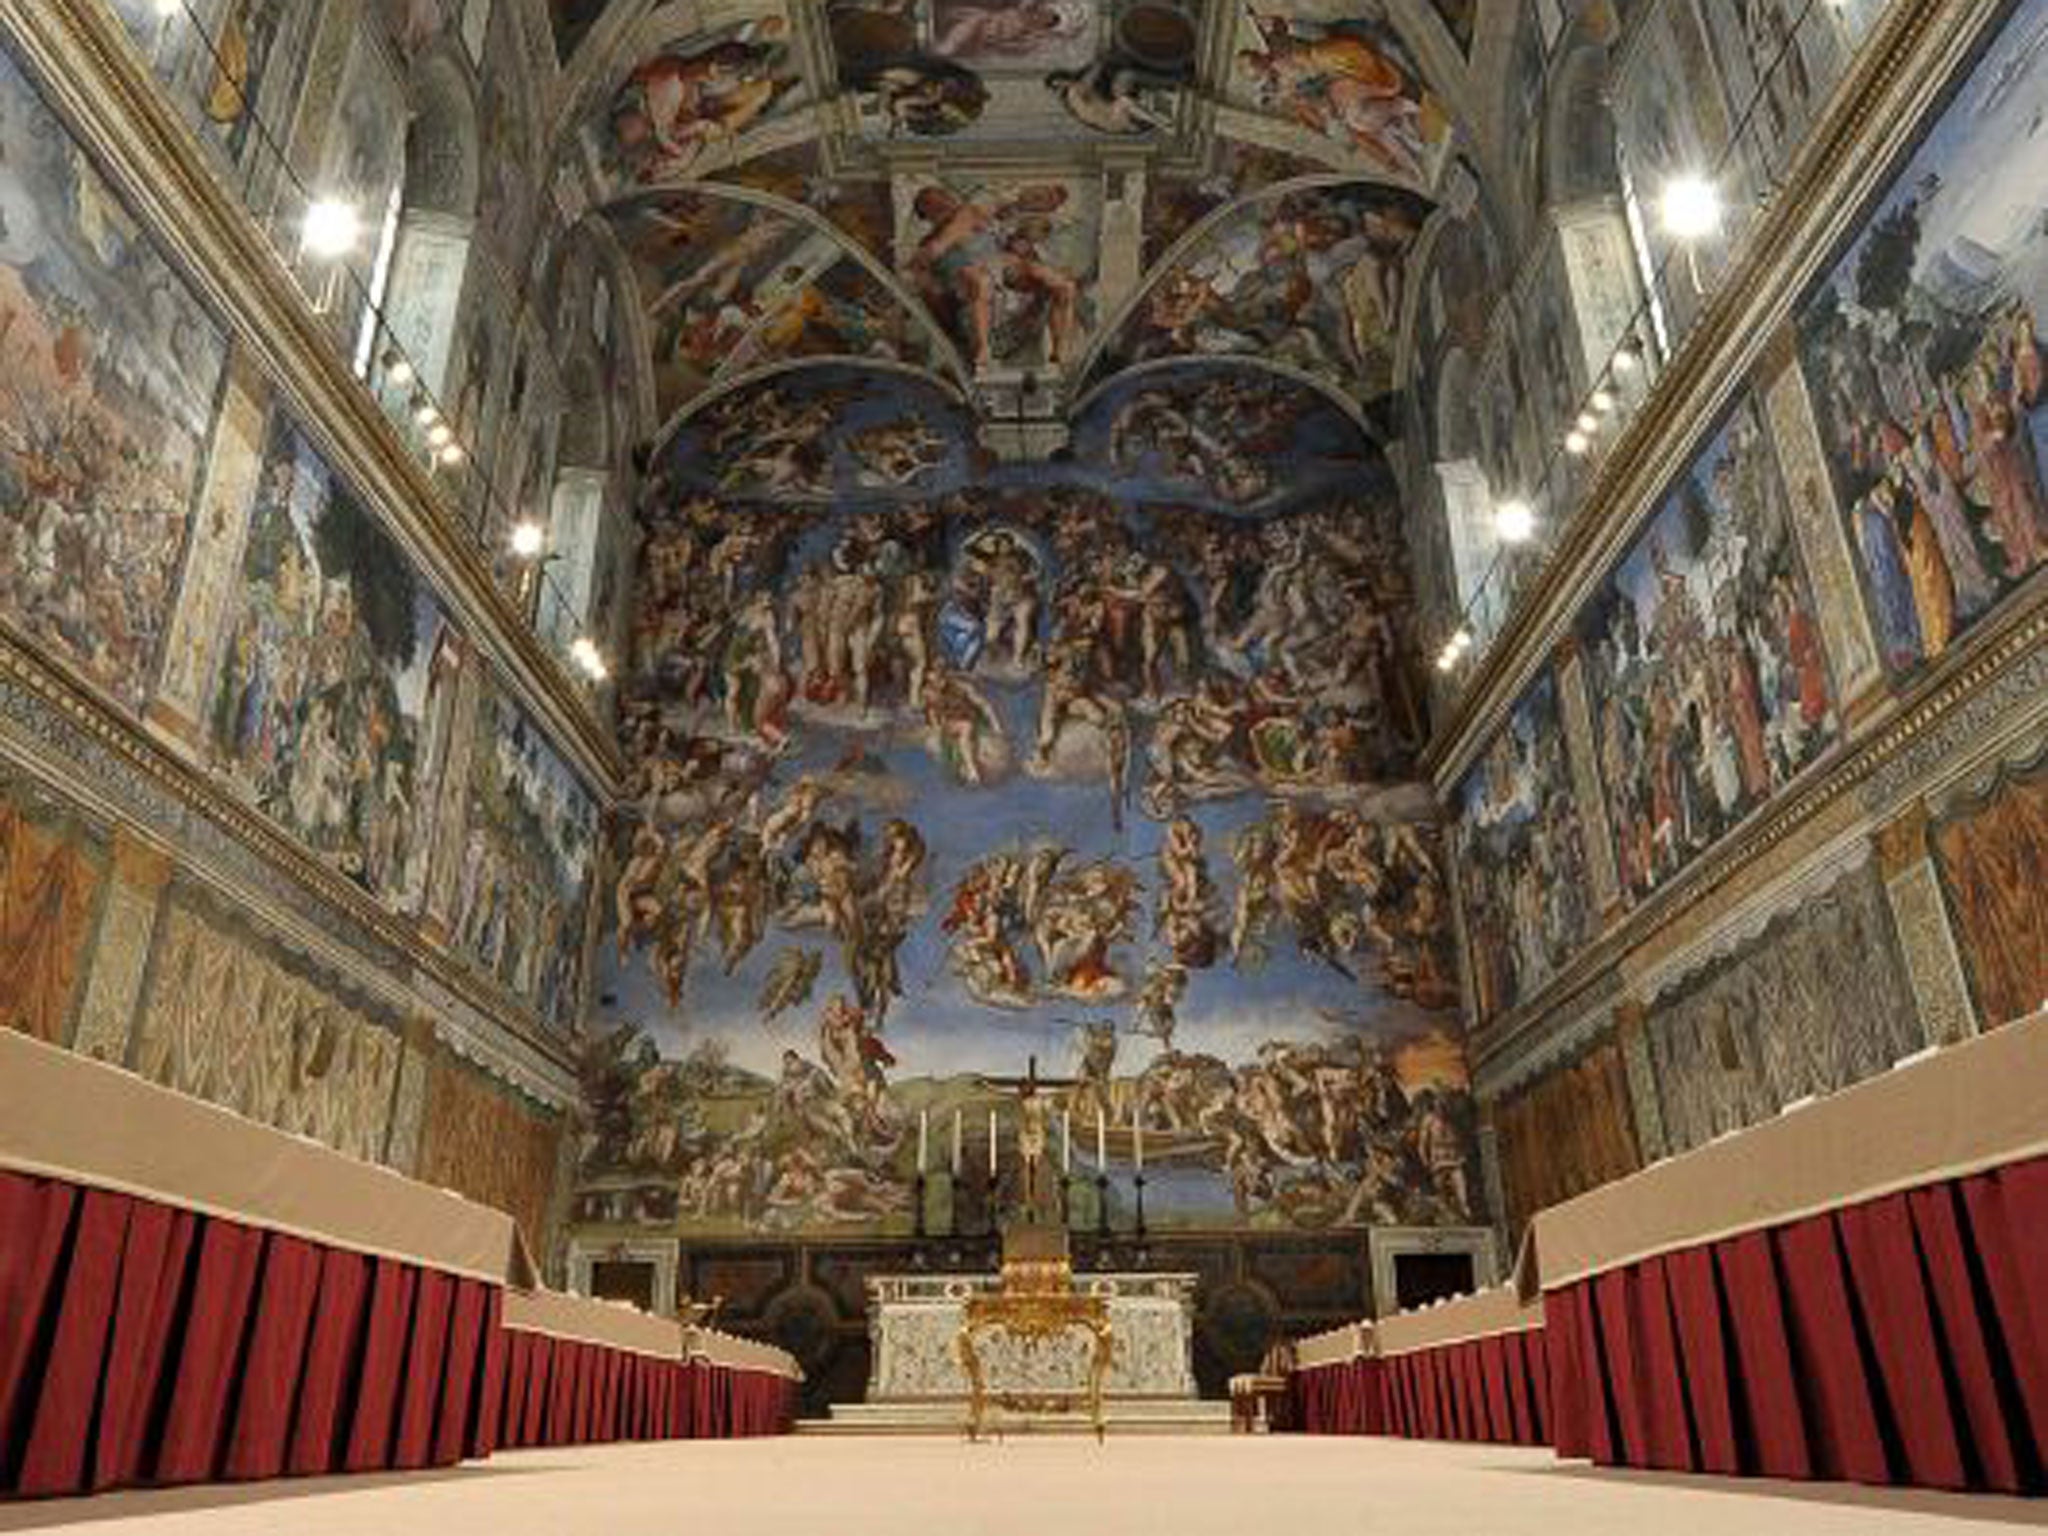 Michelangelo’s frescos in the Sistine Chapel at the Vatican, commissioned by Pope Julius II and completed in 1512